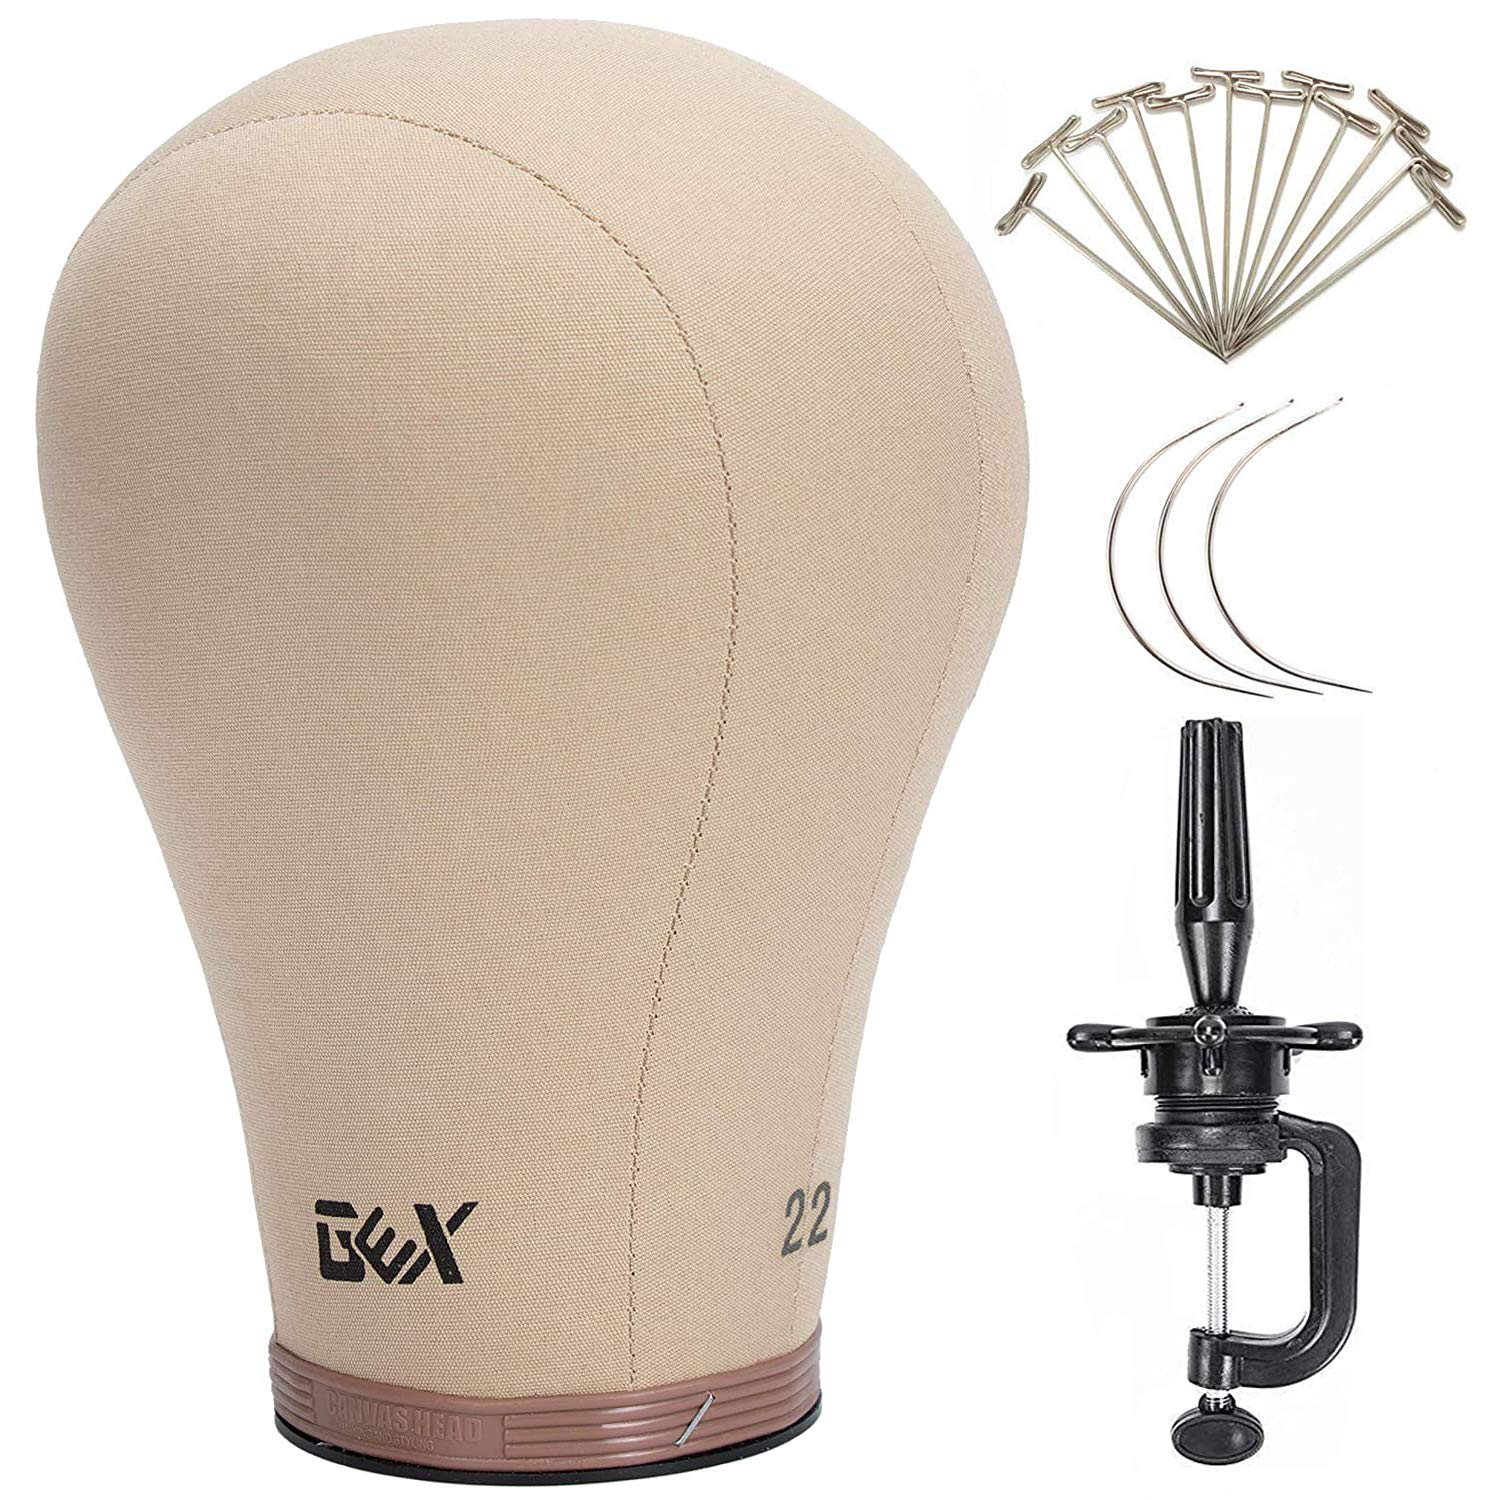  GEX 22 Cork Canvas Block Head + GEX Heavy Duty Mannequin  Tripod Wig Stand Bundle : Beauty & Personal Care